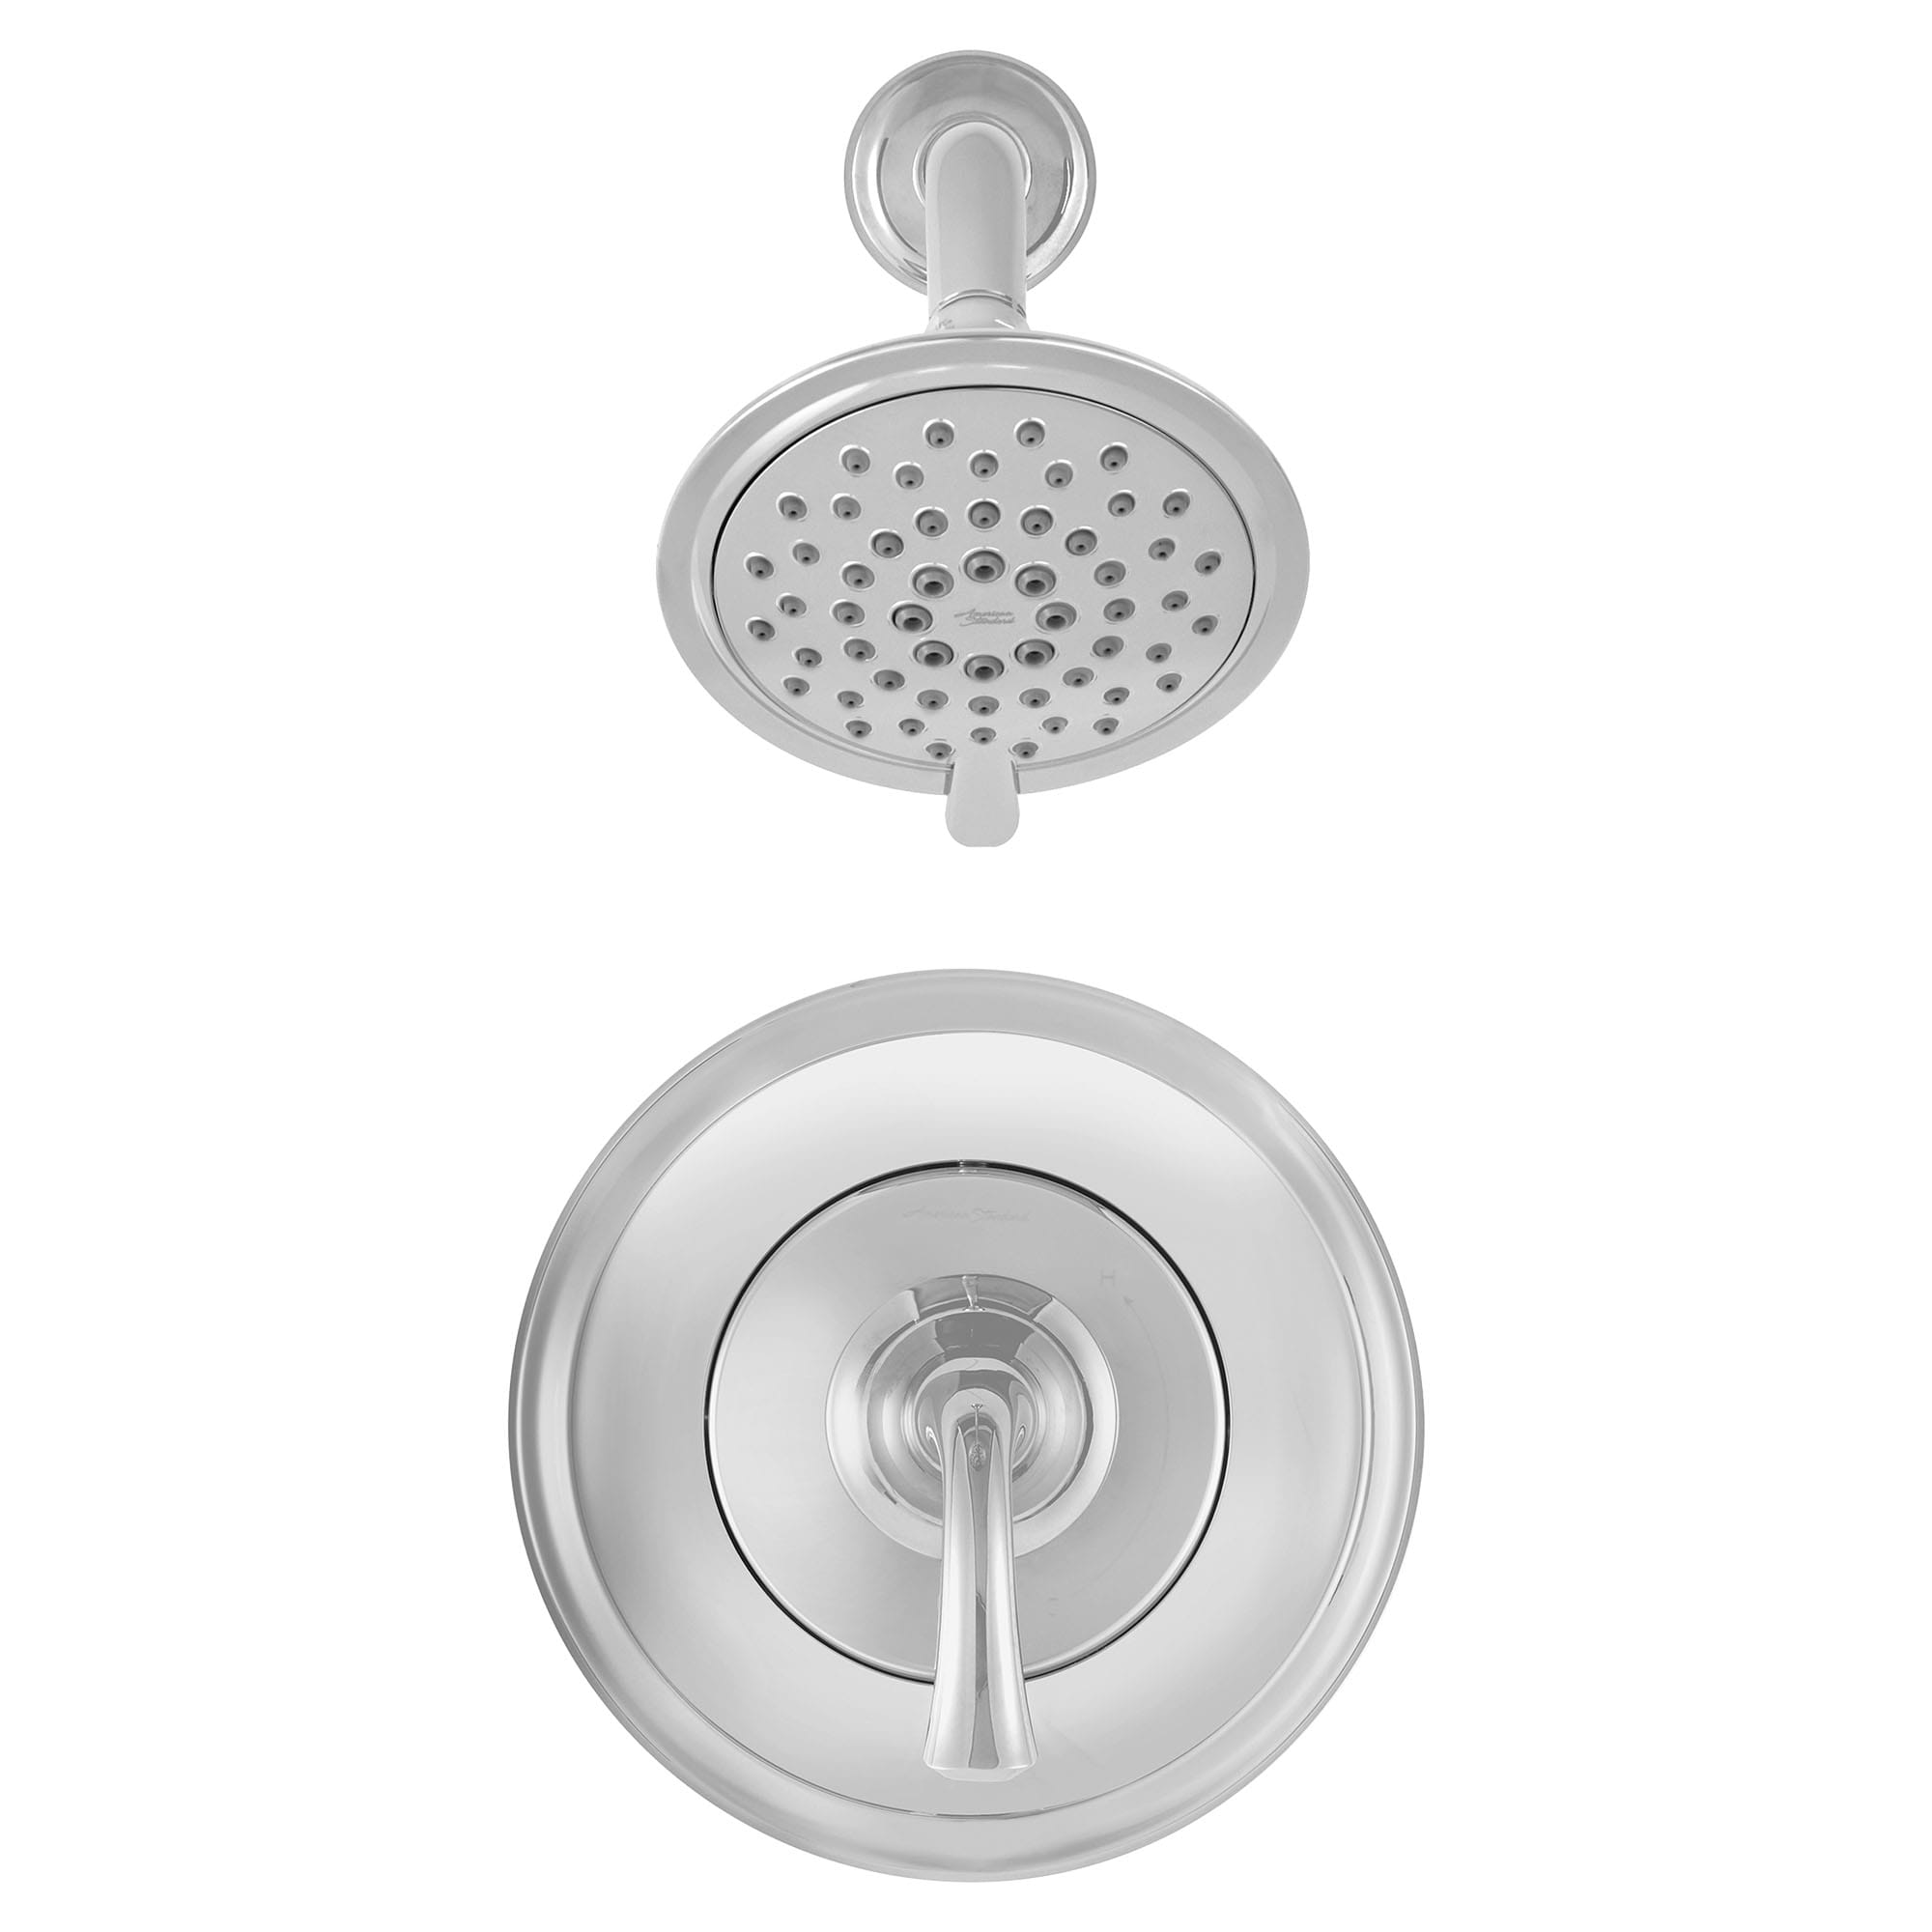 Patience 175 gpm 66 L min Shower Trim Kit With Water Saving 3 Function Showerhead Double Ceramic Pressure Balance Cartridge With Lever Handle CHROME